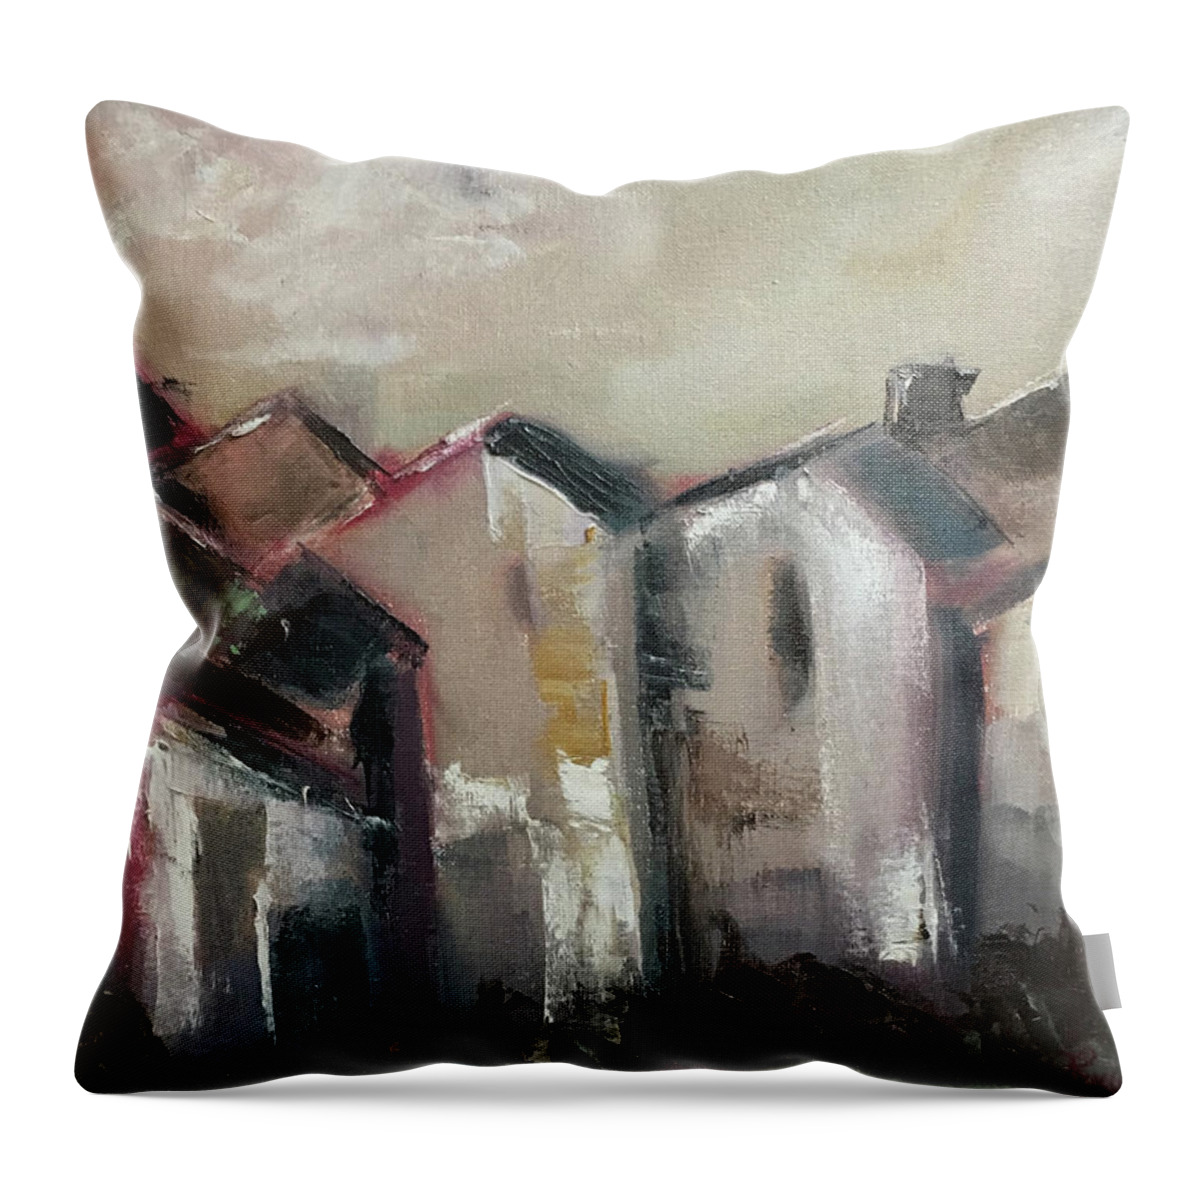 Loose Brush Throw Pillow featuring the painting Corsica by Roxy Rich